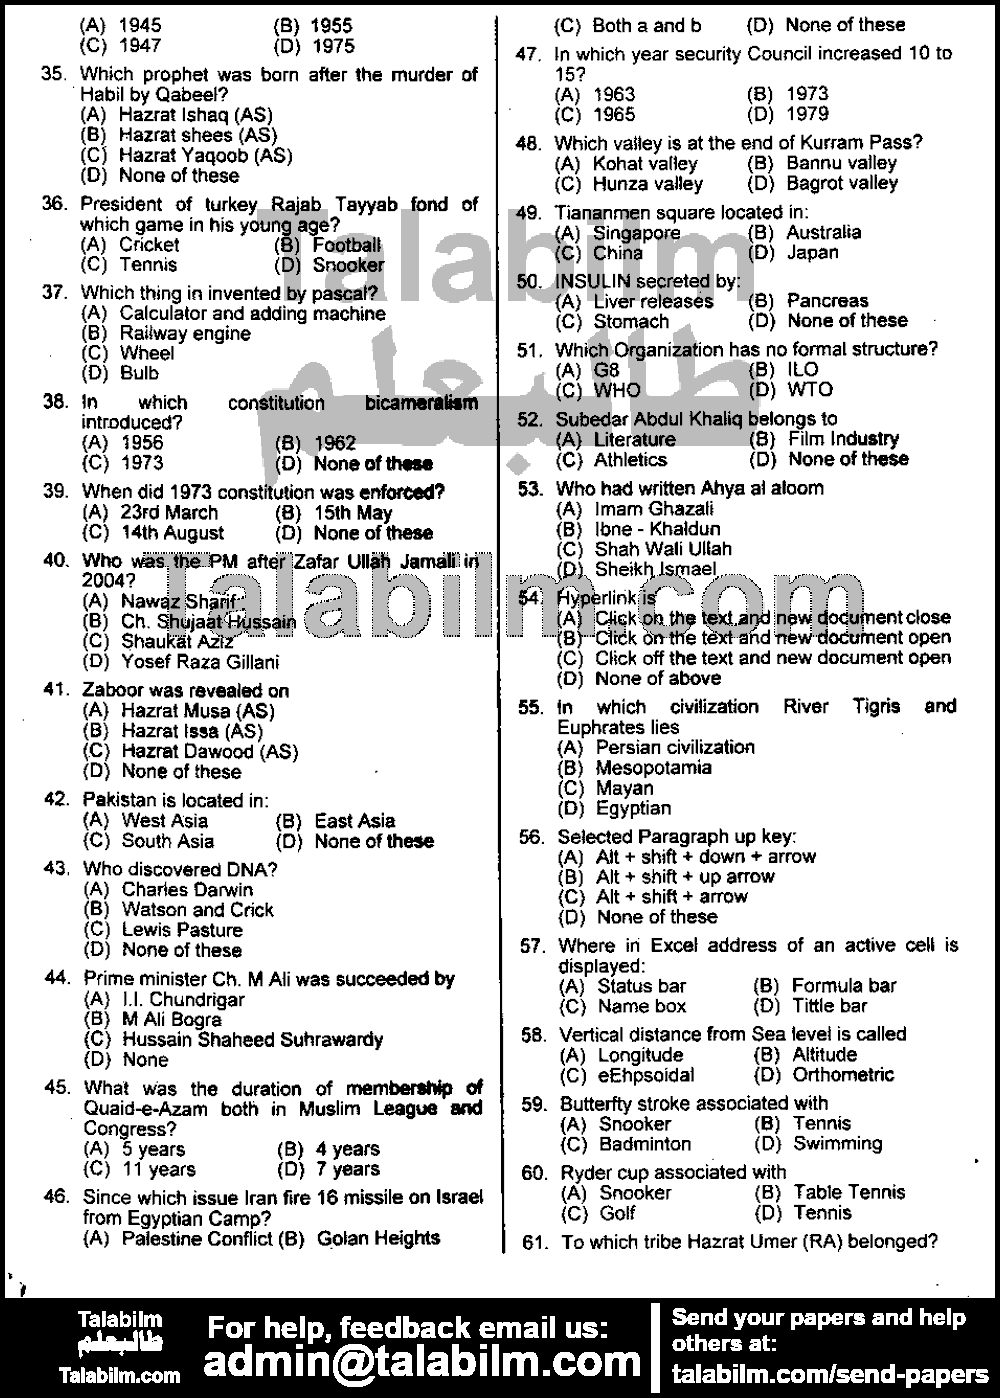 General Elementary School Educator 0 past paper for 2019 Page No. 2